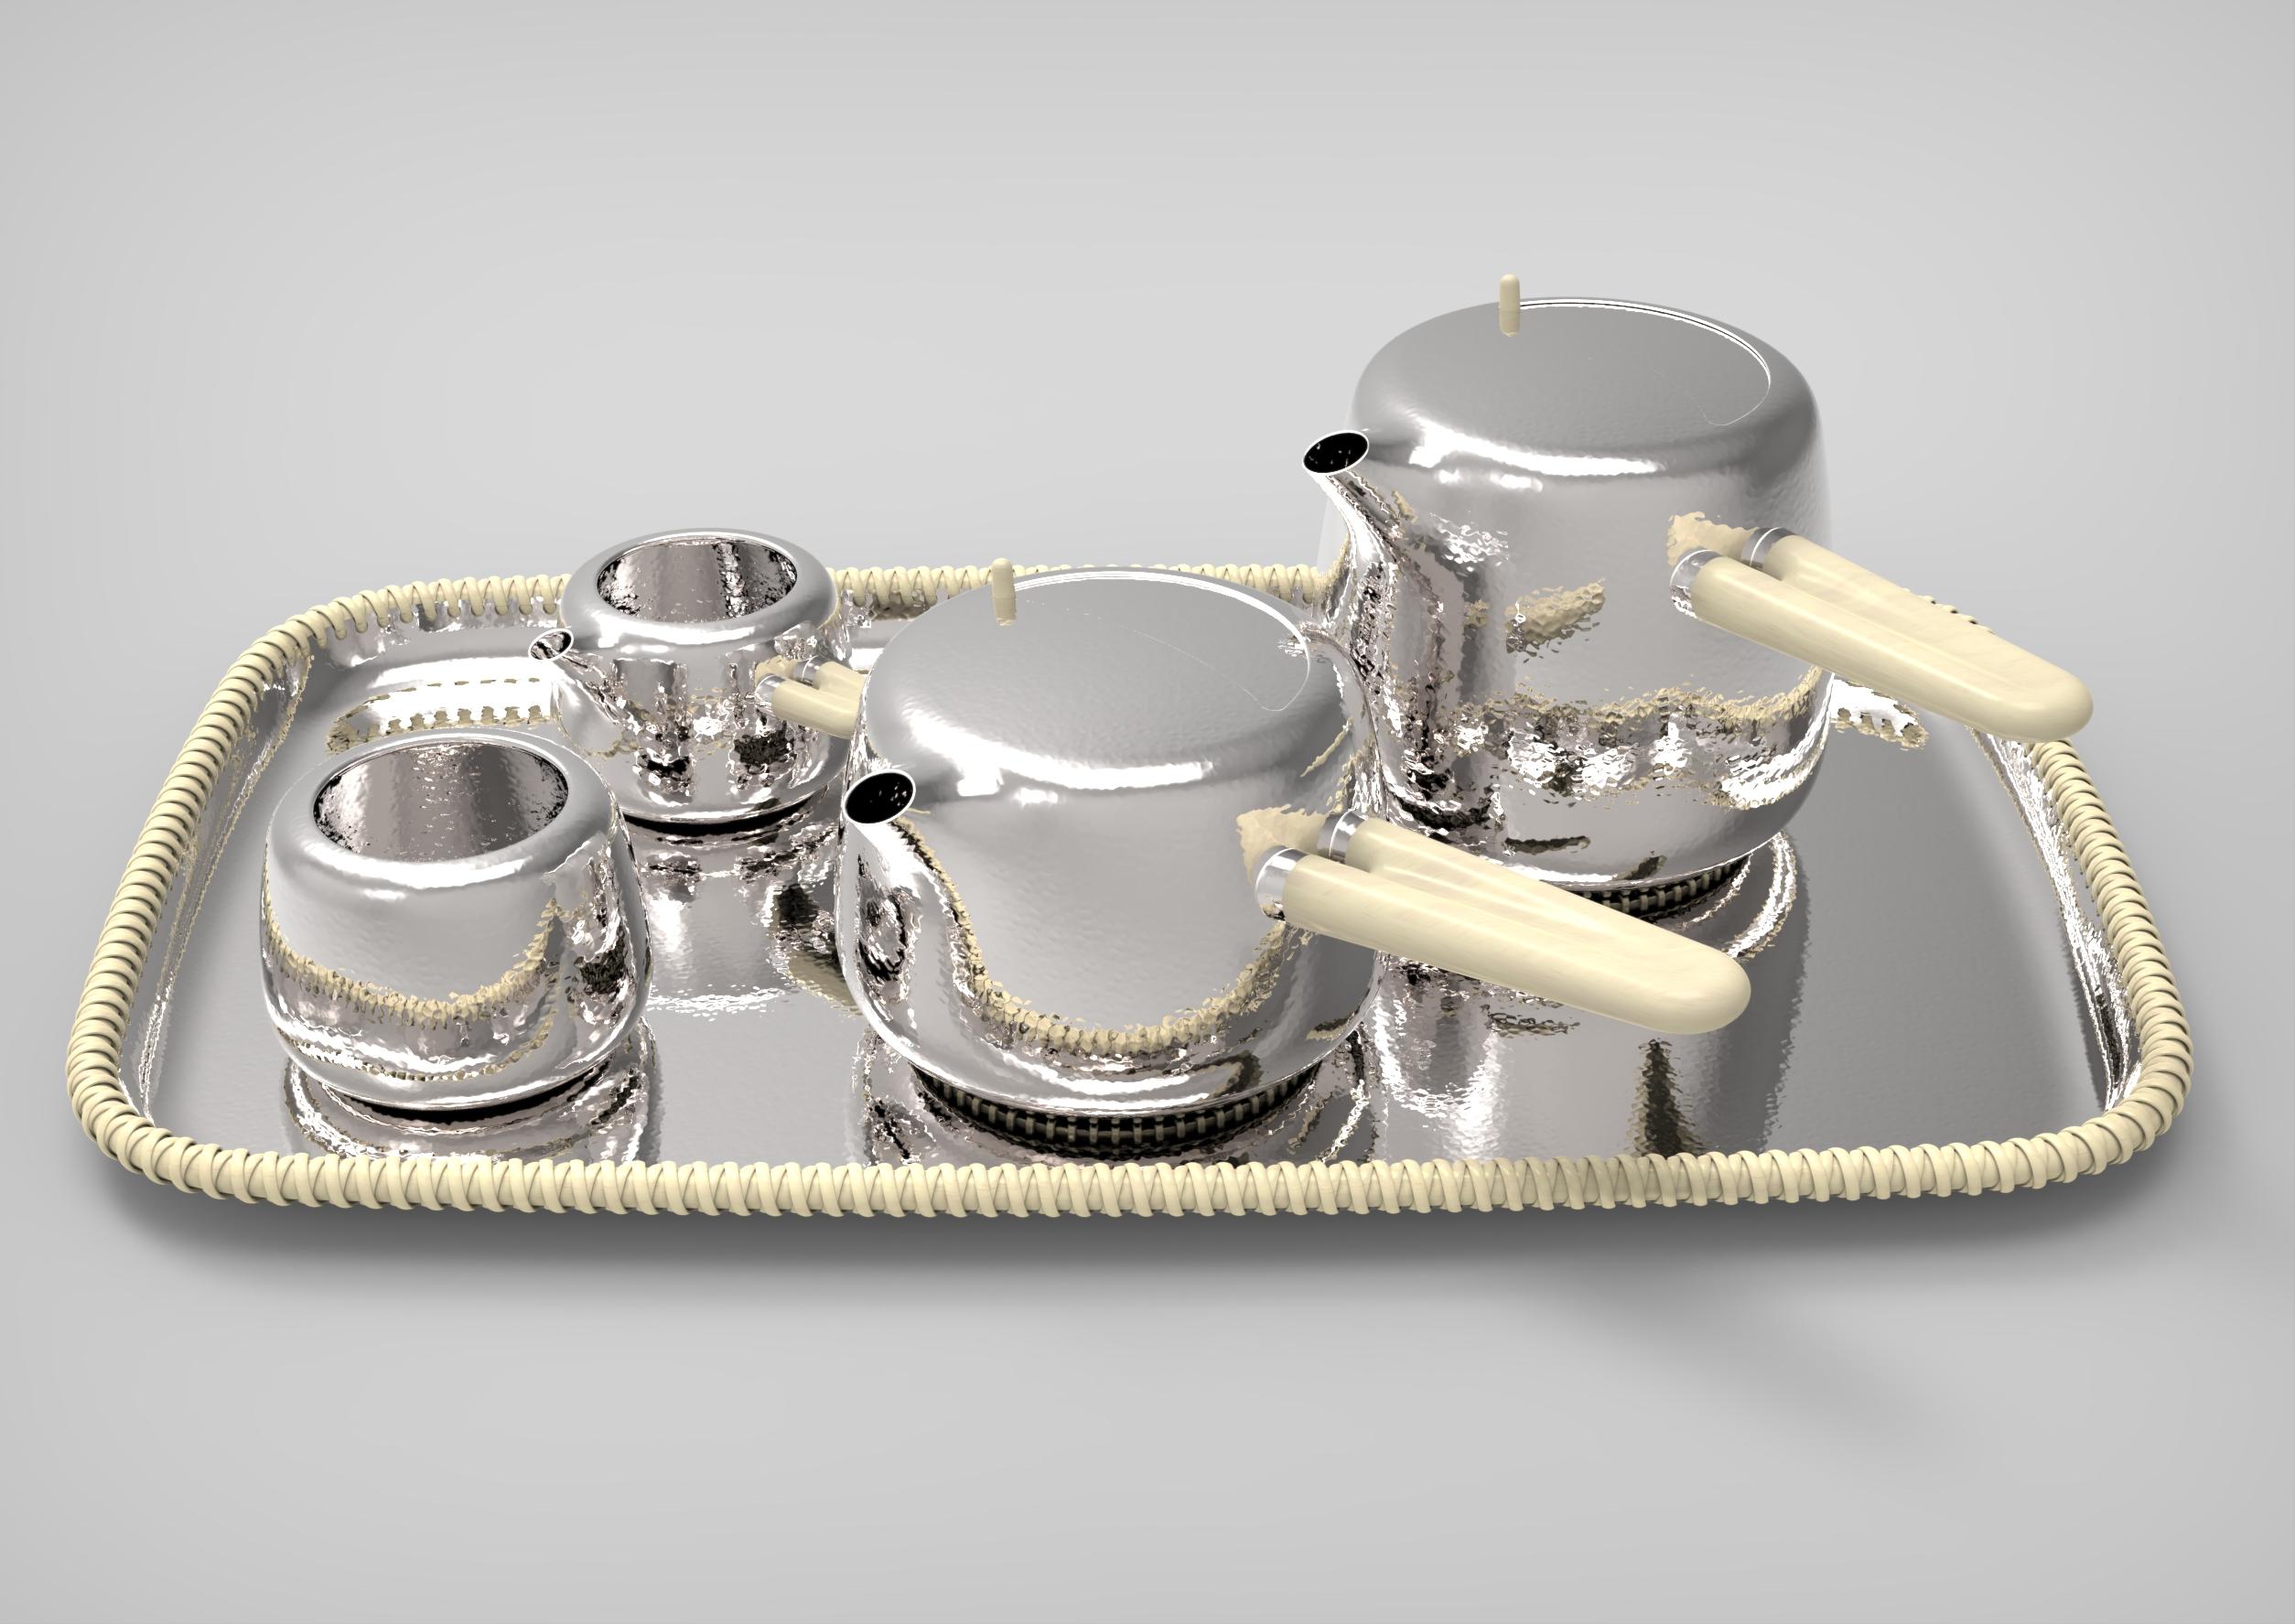 Contemporary Limited Edition 7/10 Georg Jensen Sterling Silver Marc Newson Tea Set 1500 For Sale